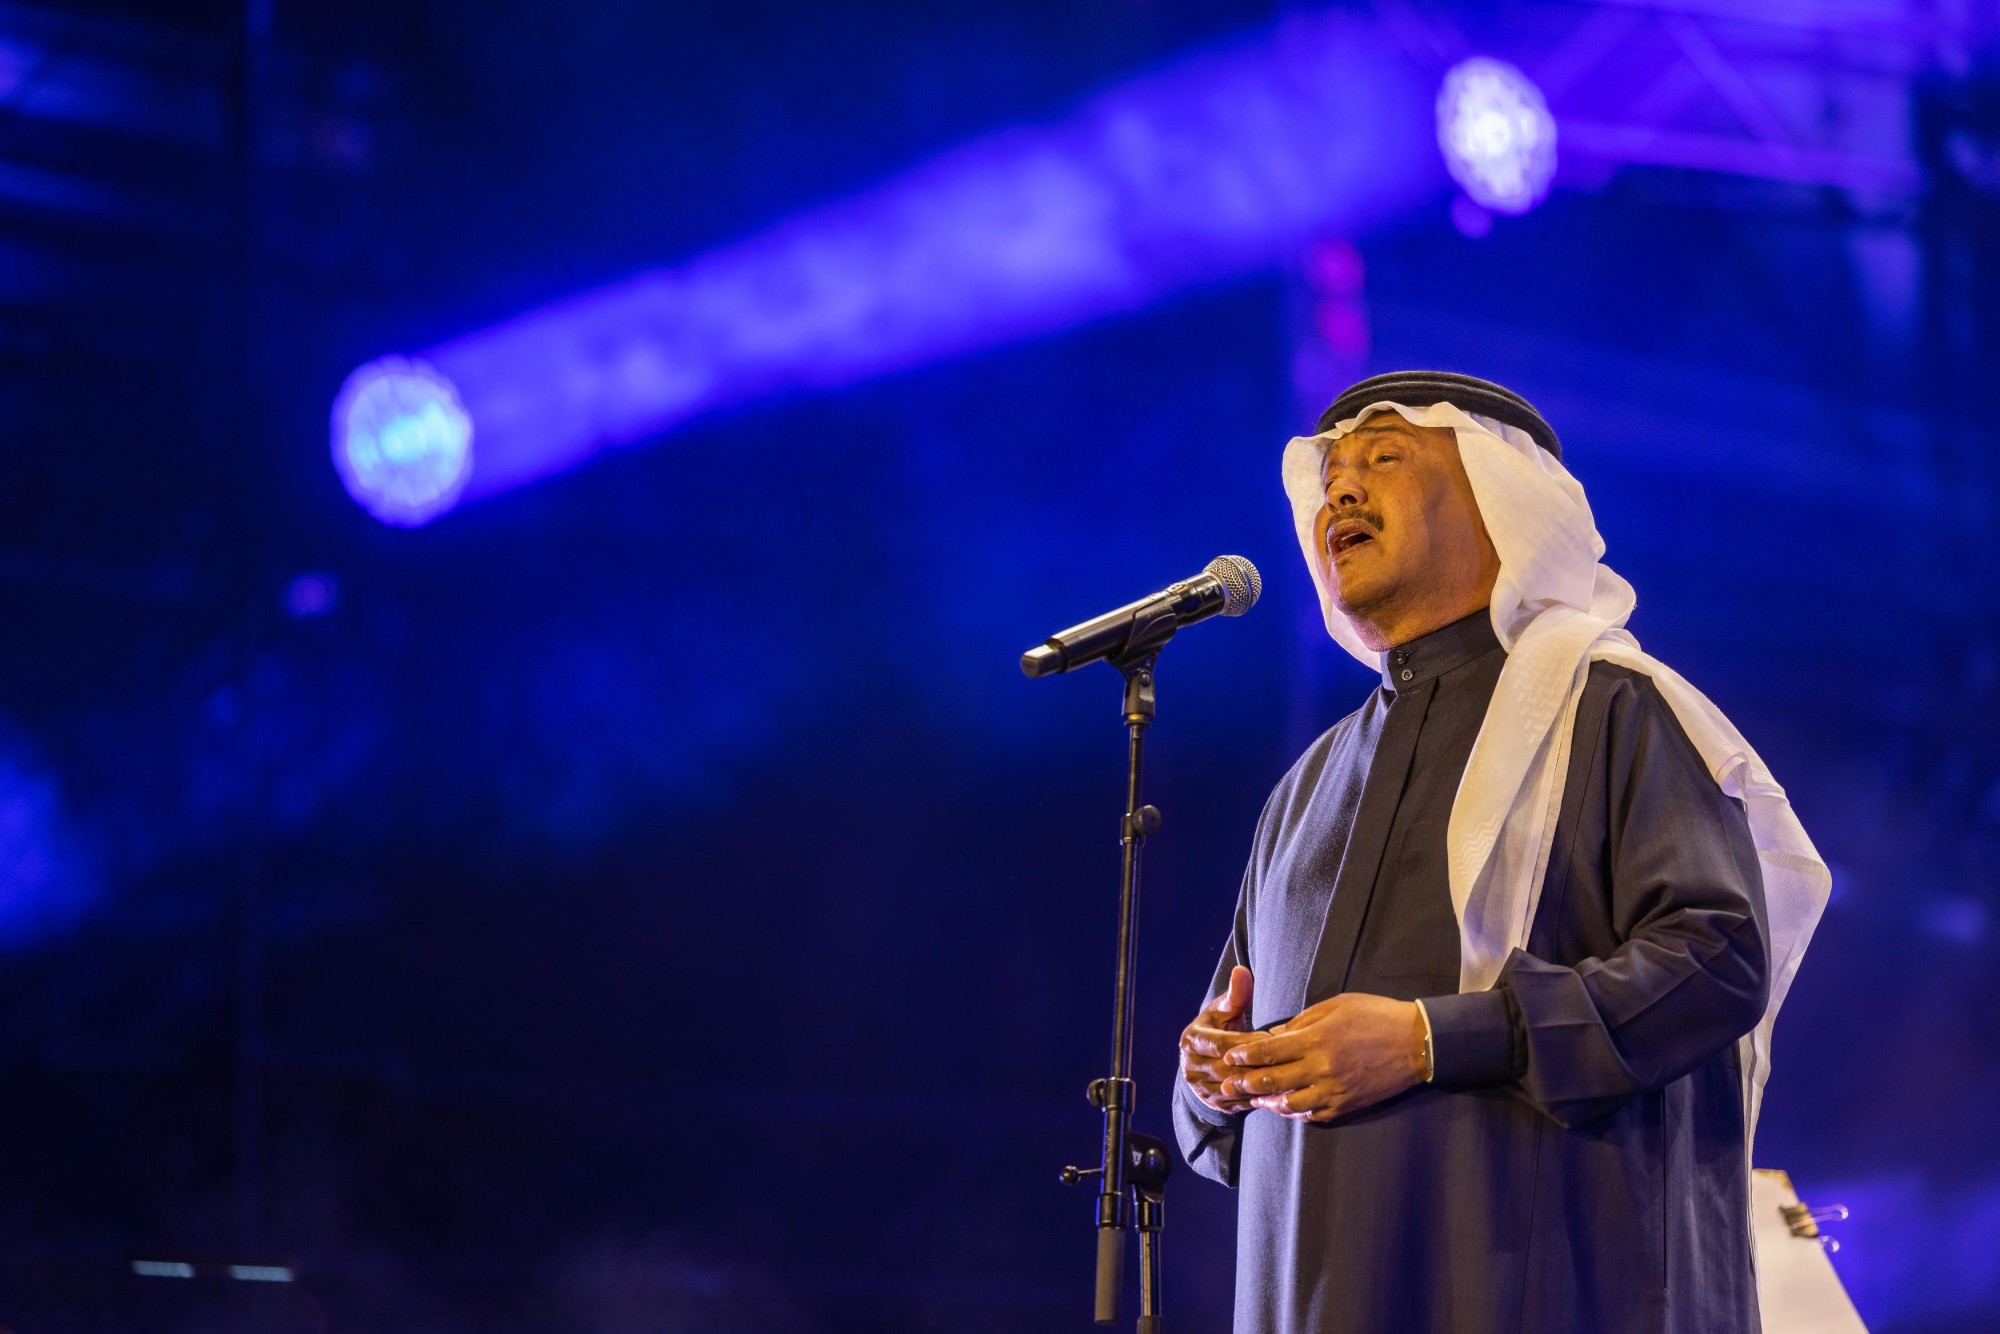 Mohammed Abdo performs at Jubilee Stage during the Kingdom of Saudi Arabia National Day m30558